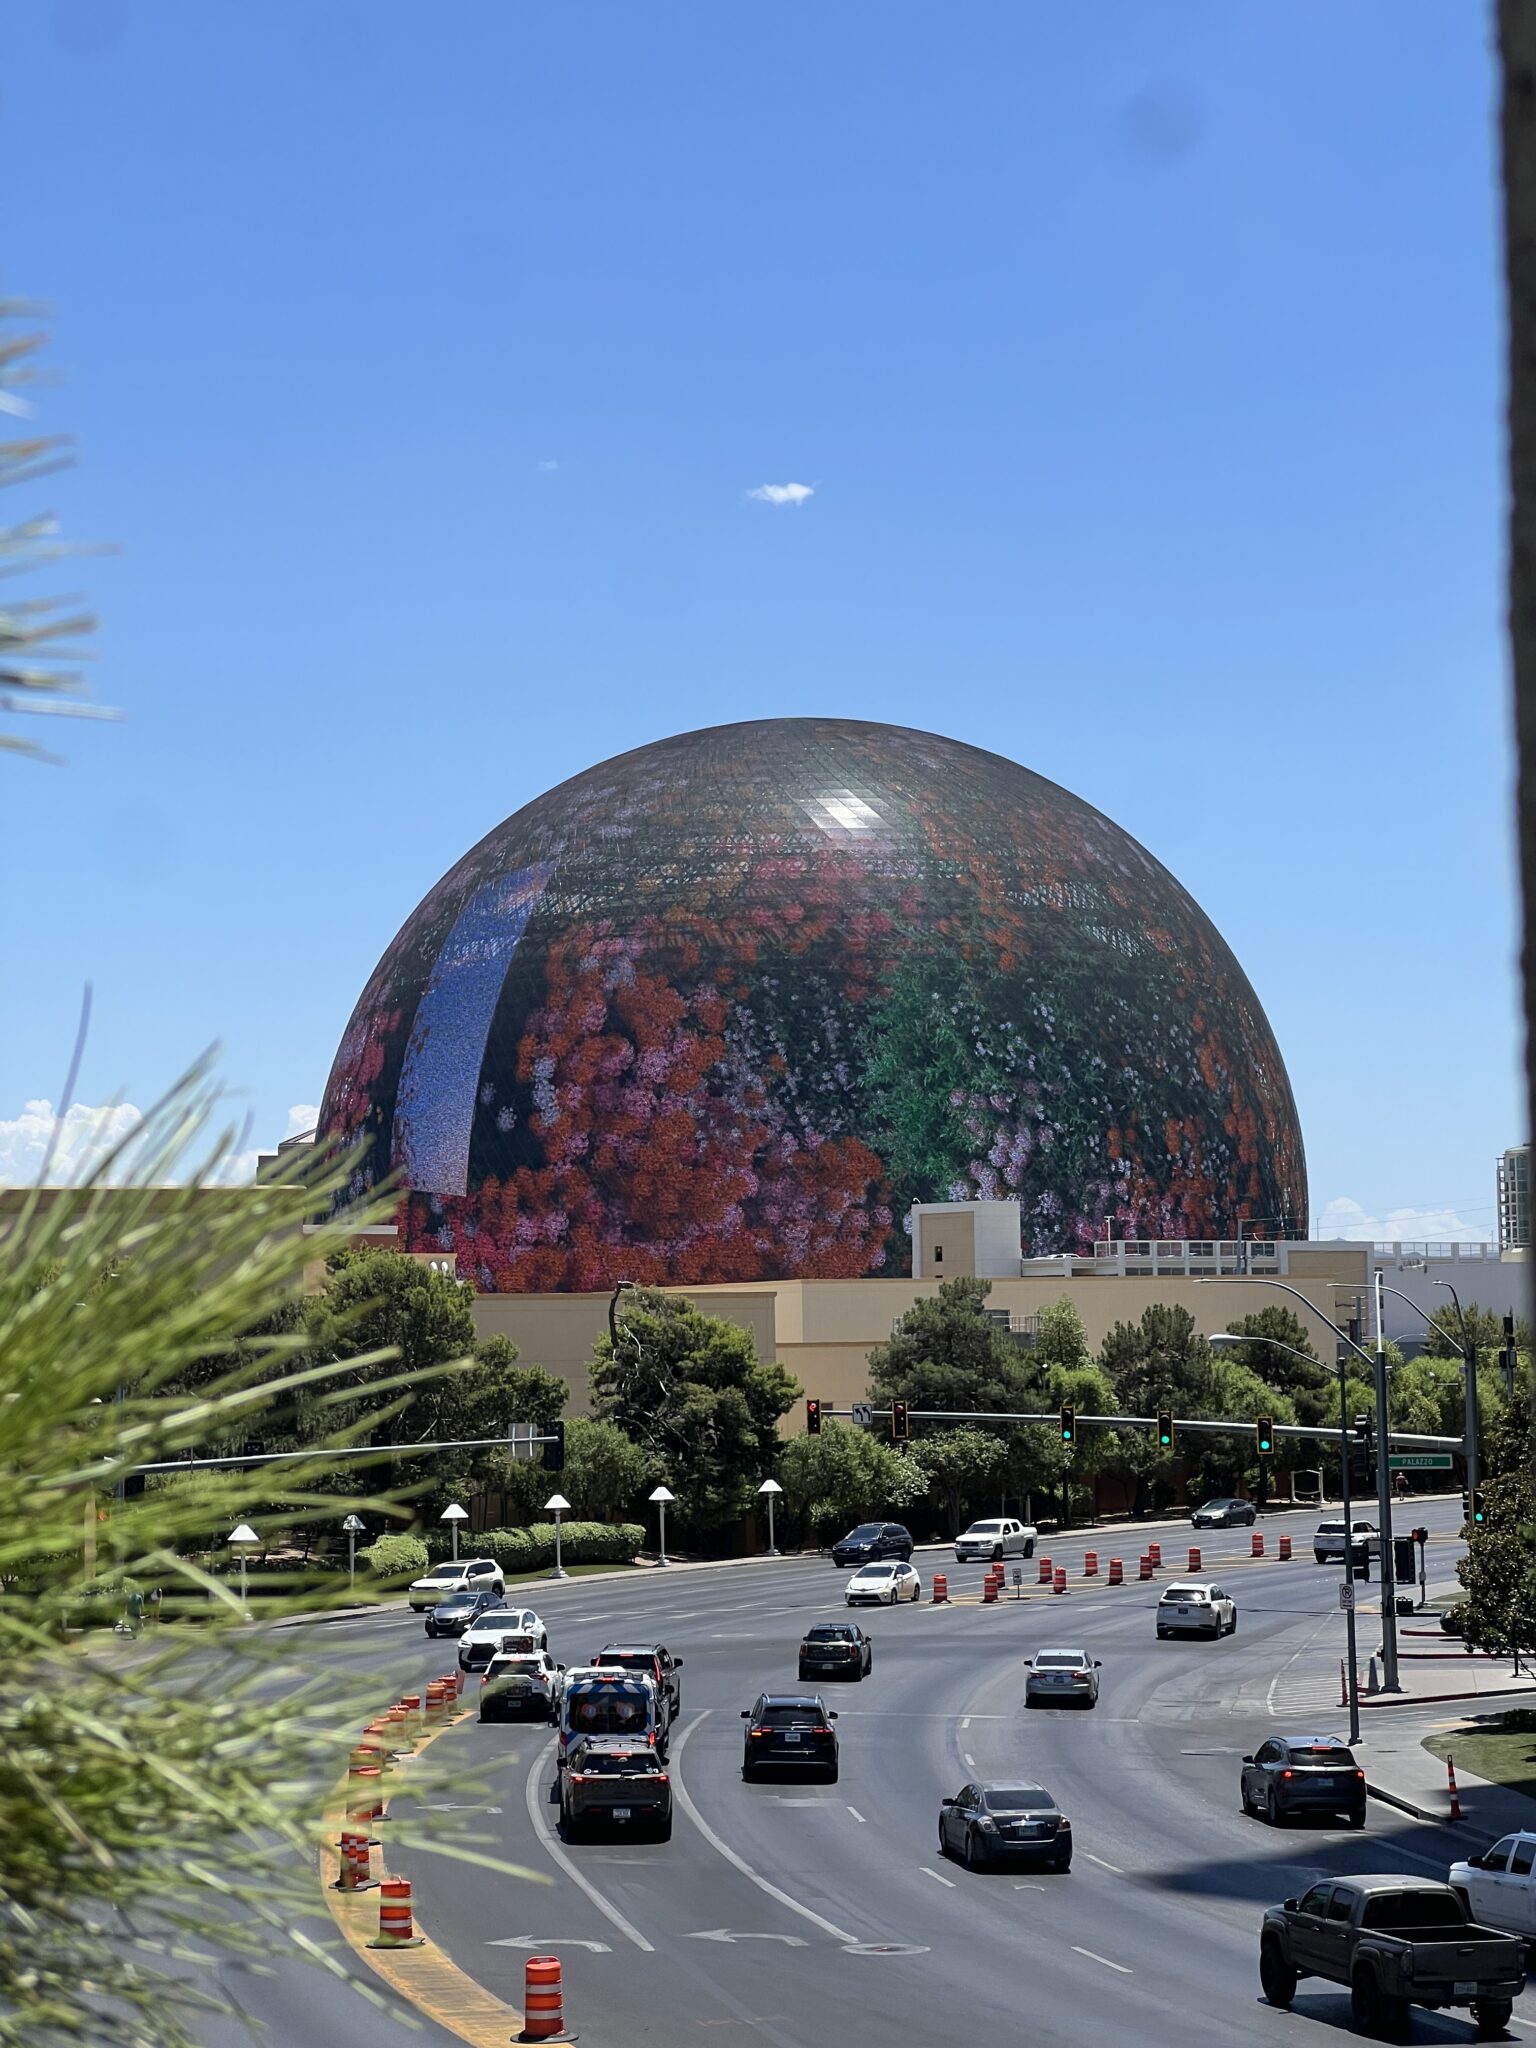 View of the Sphere on bridge from Venetian to Wynn with image of Las Vegas flowers